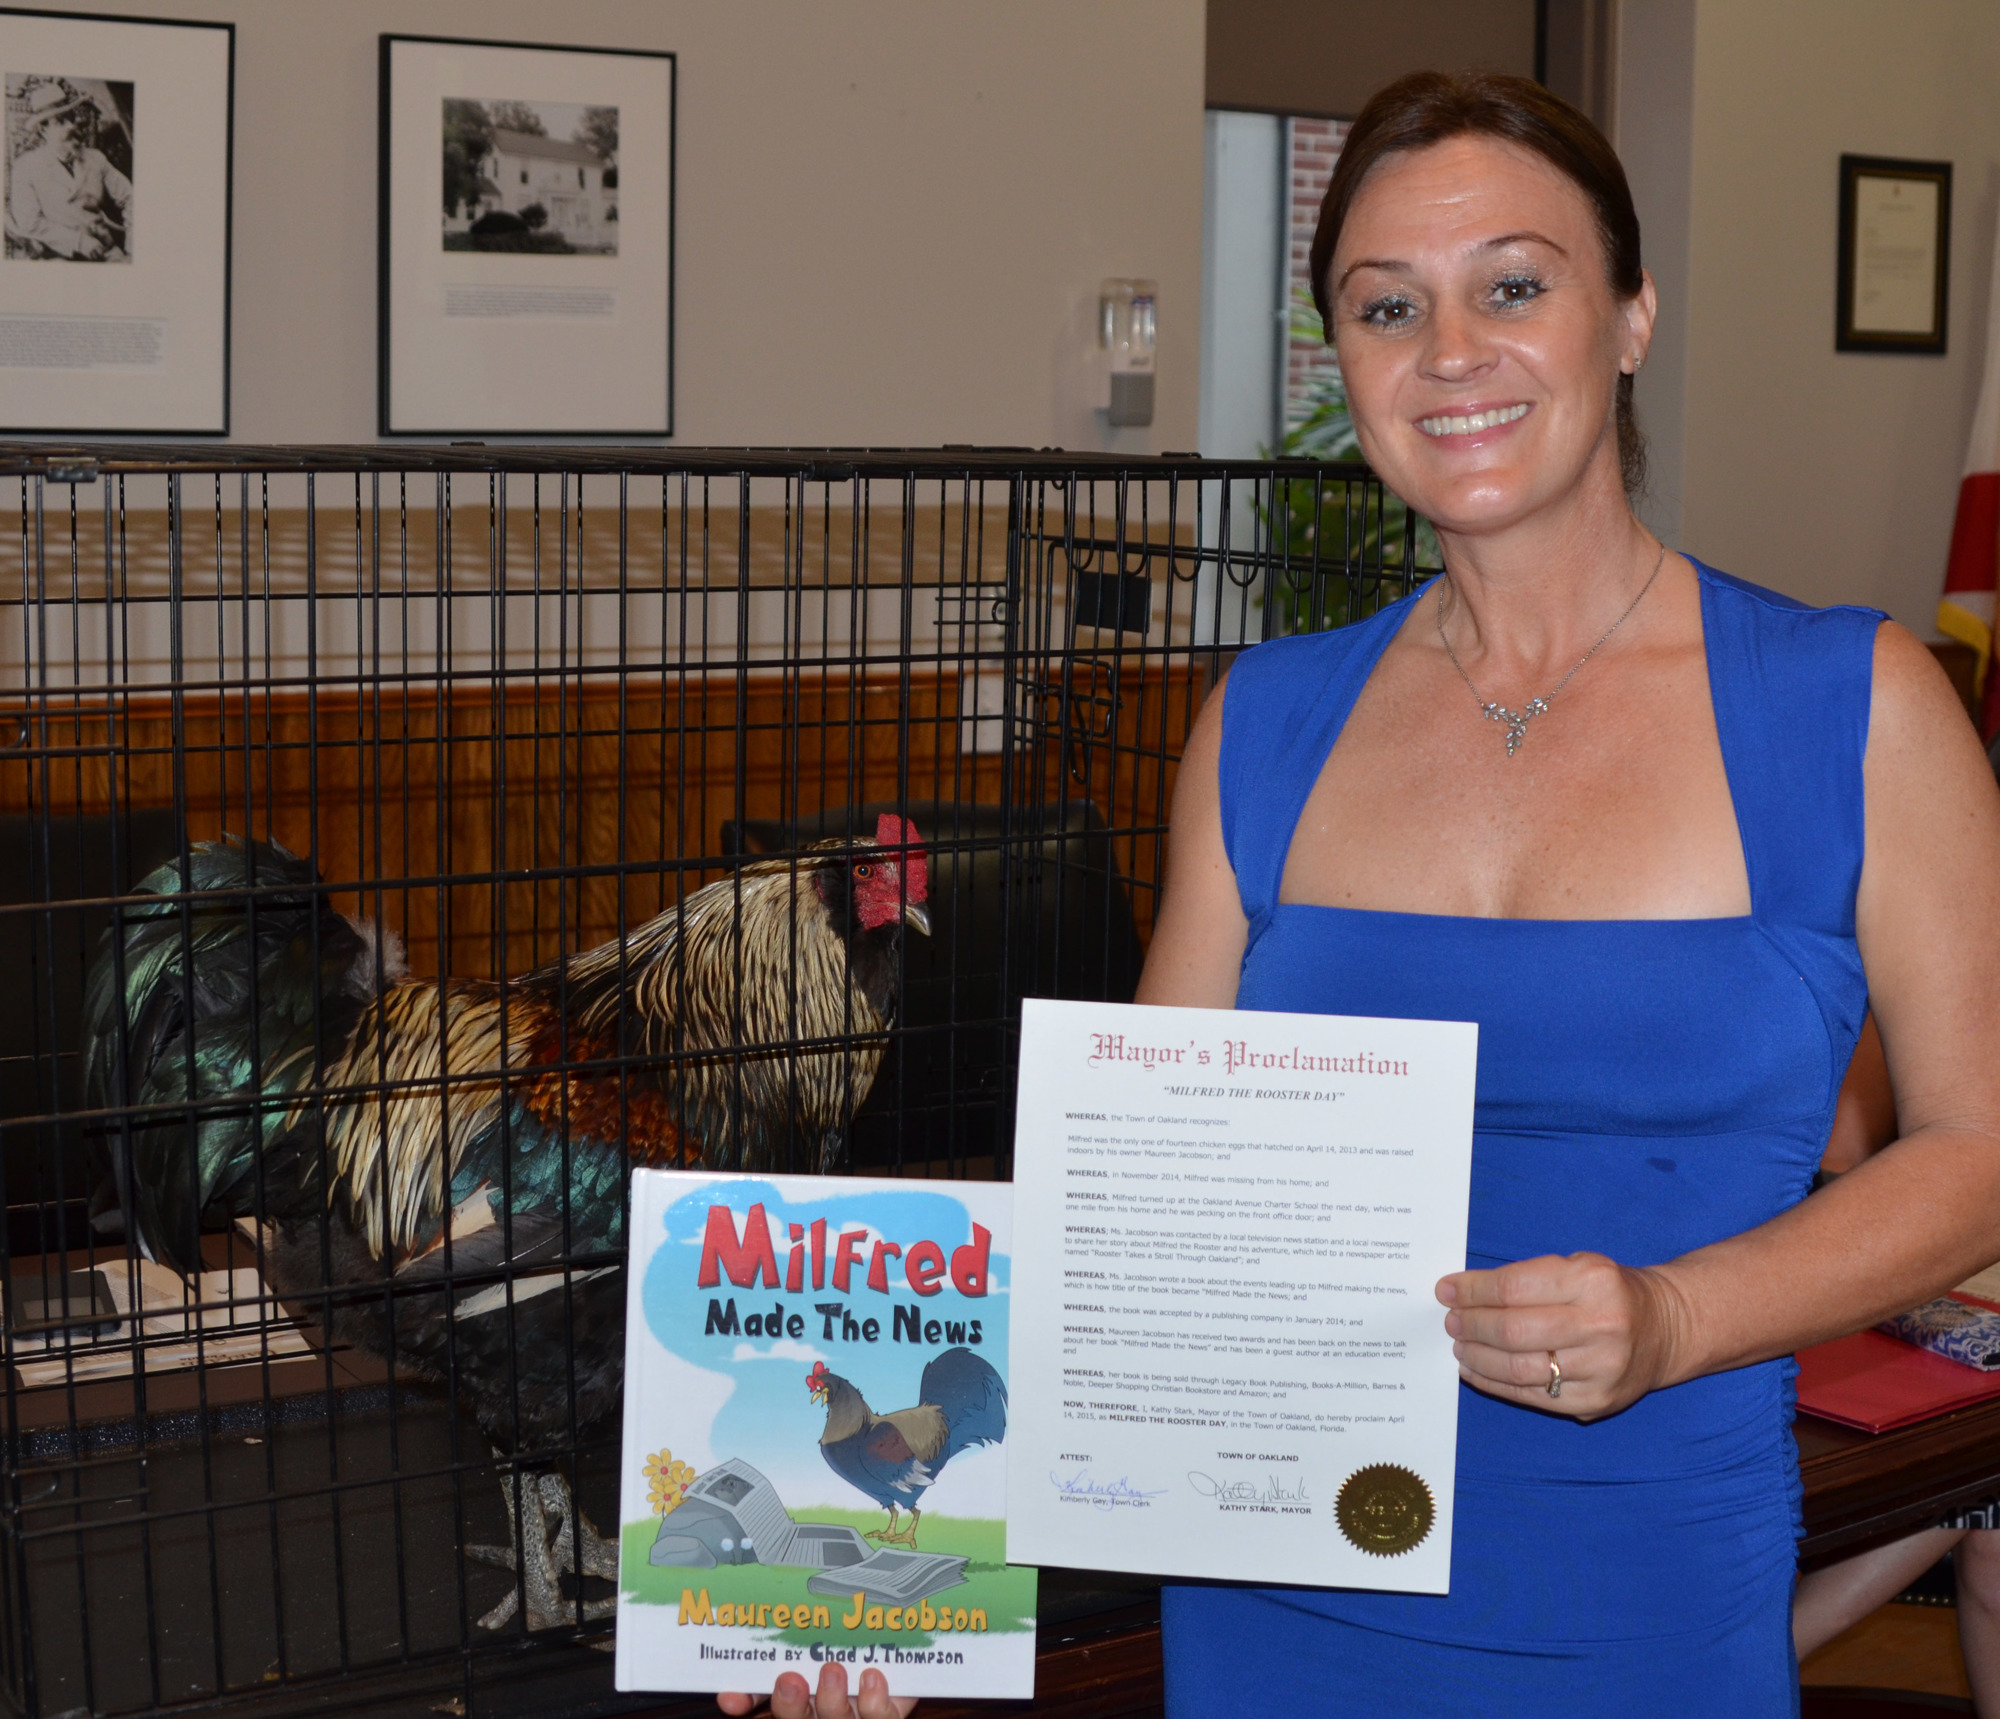 Milfred the rooster examines his book and mayor’s proclamation, held by his owner, Maureen Jacobson, in April 2015.